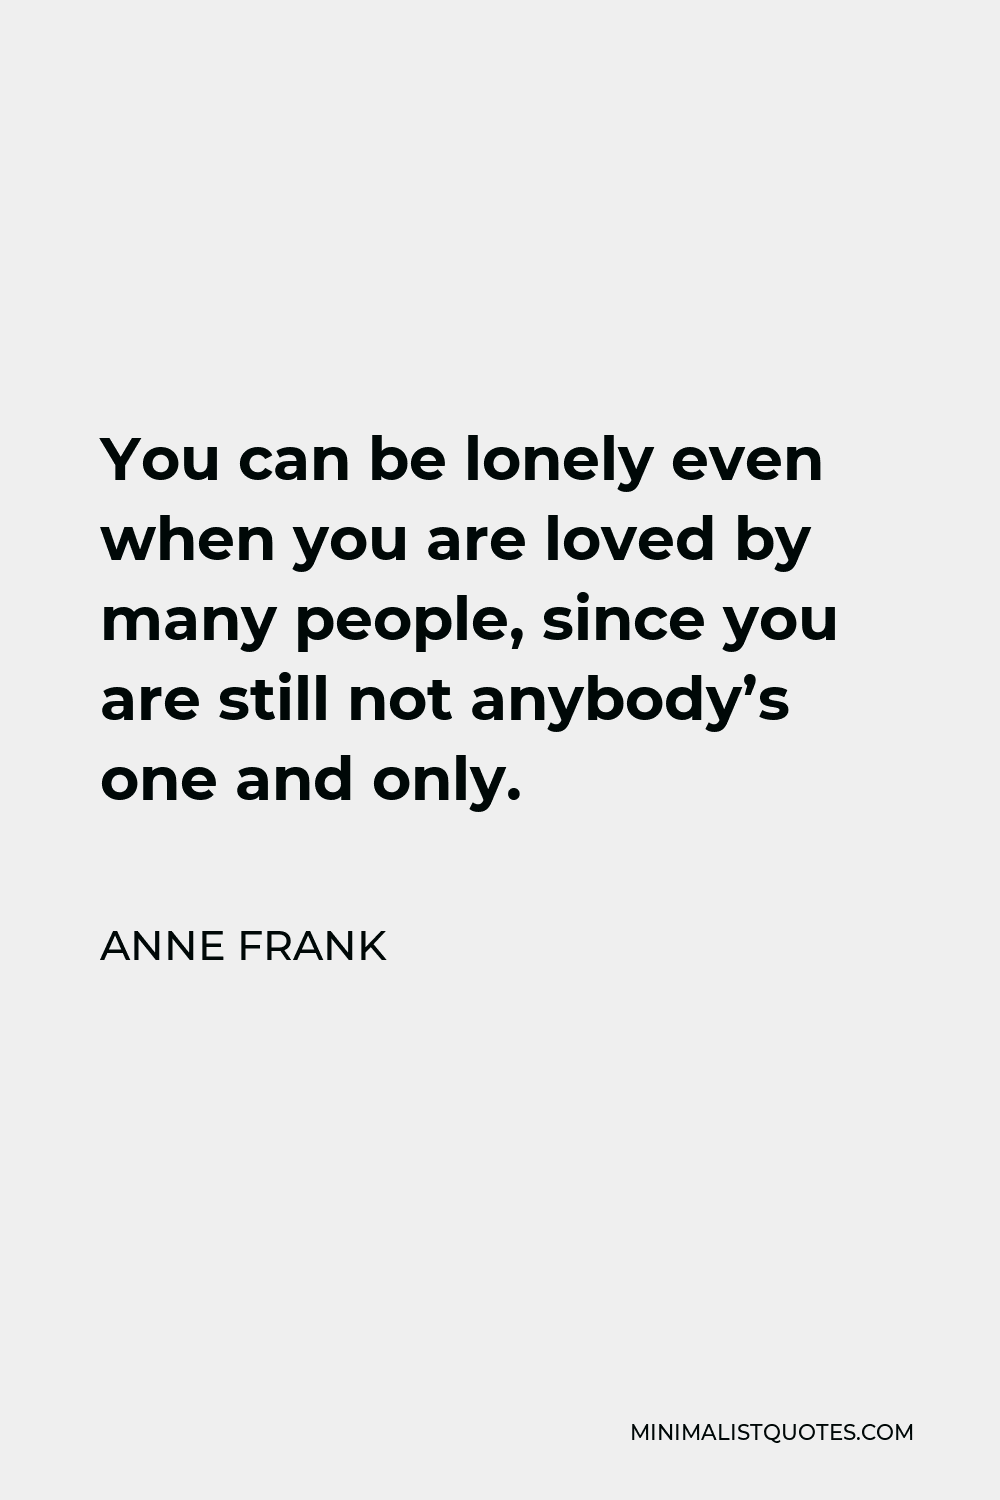 Anne Frank Quote - You can be lonely even when you are loved by many people, since you are still not anybody’s one and only.